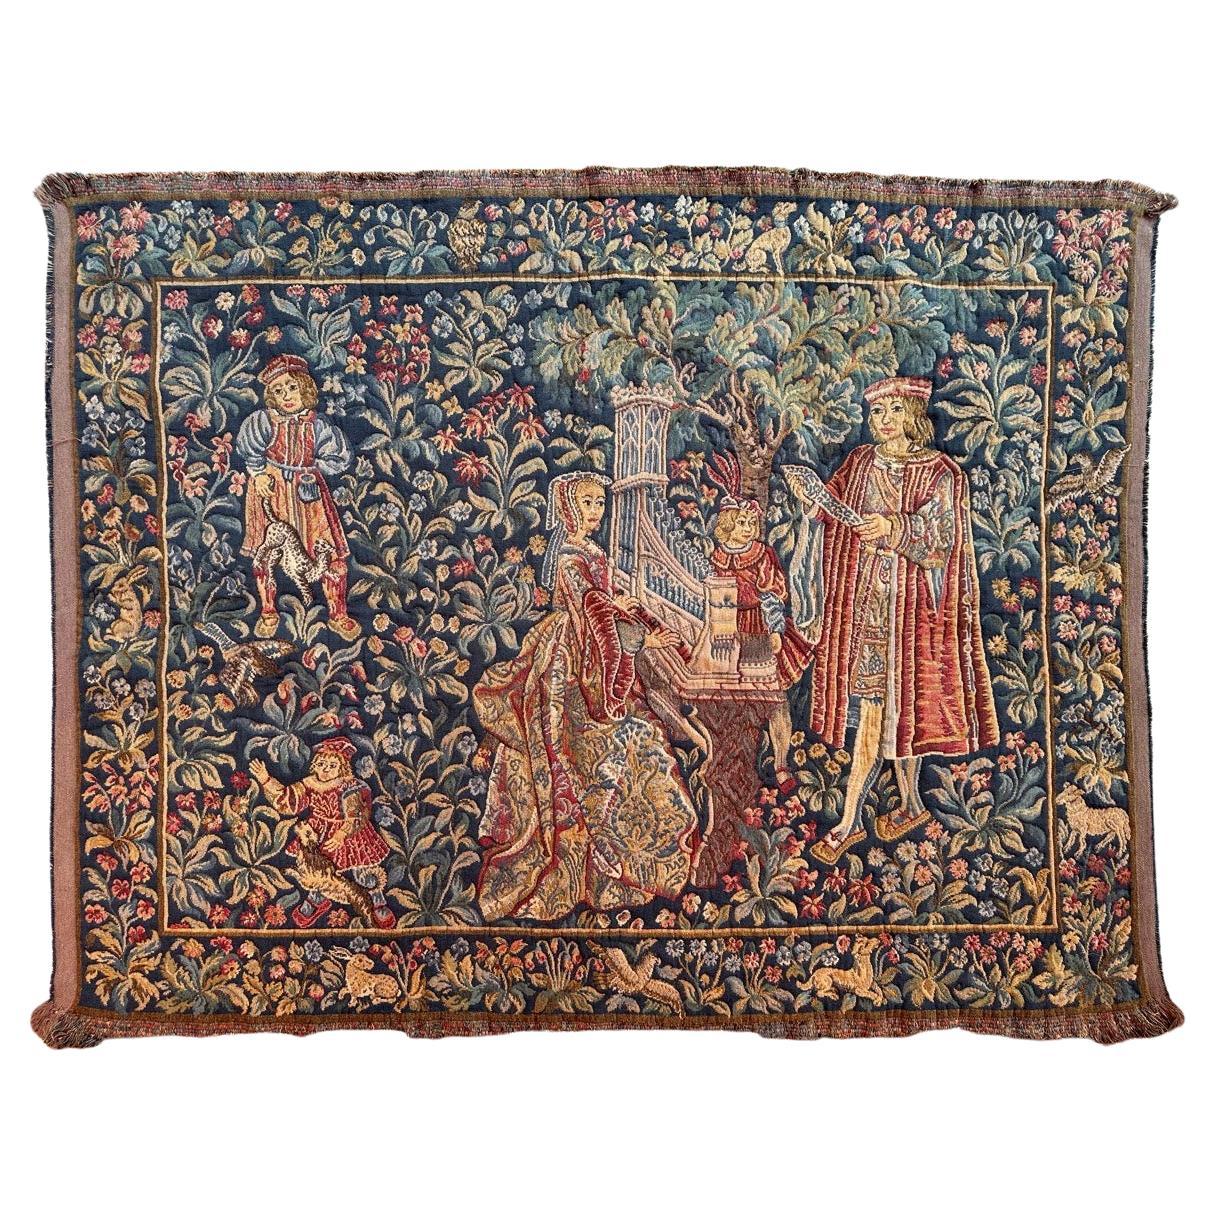 Bobyrug's Nice Vintage Aubusson Style Jaquar Tapestry with Medieval Museum Desig